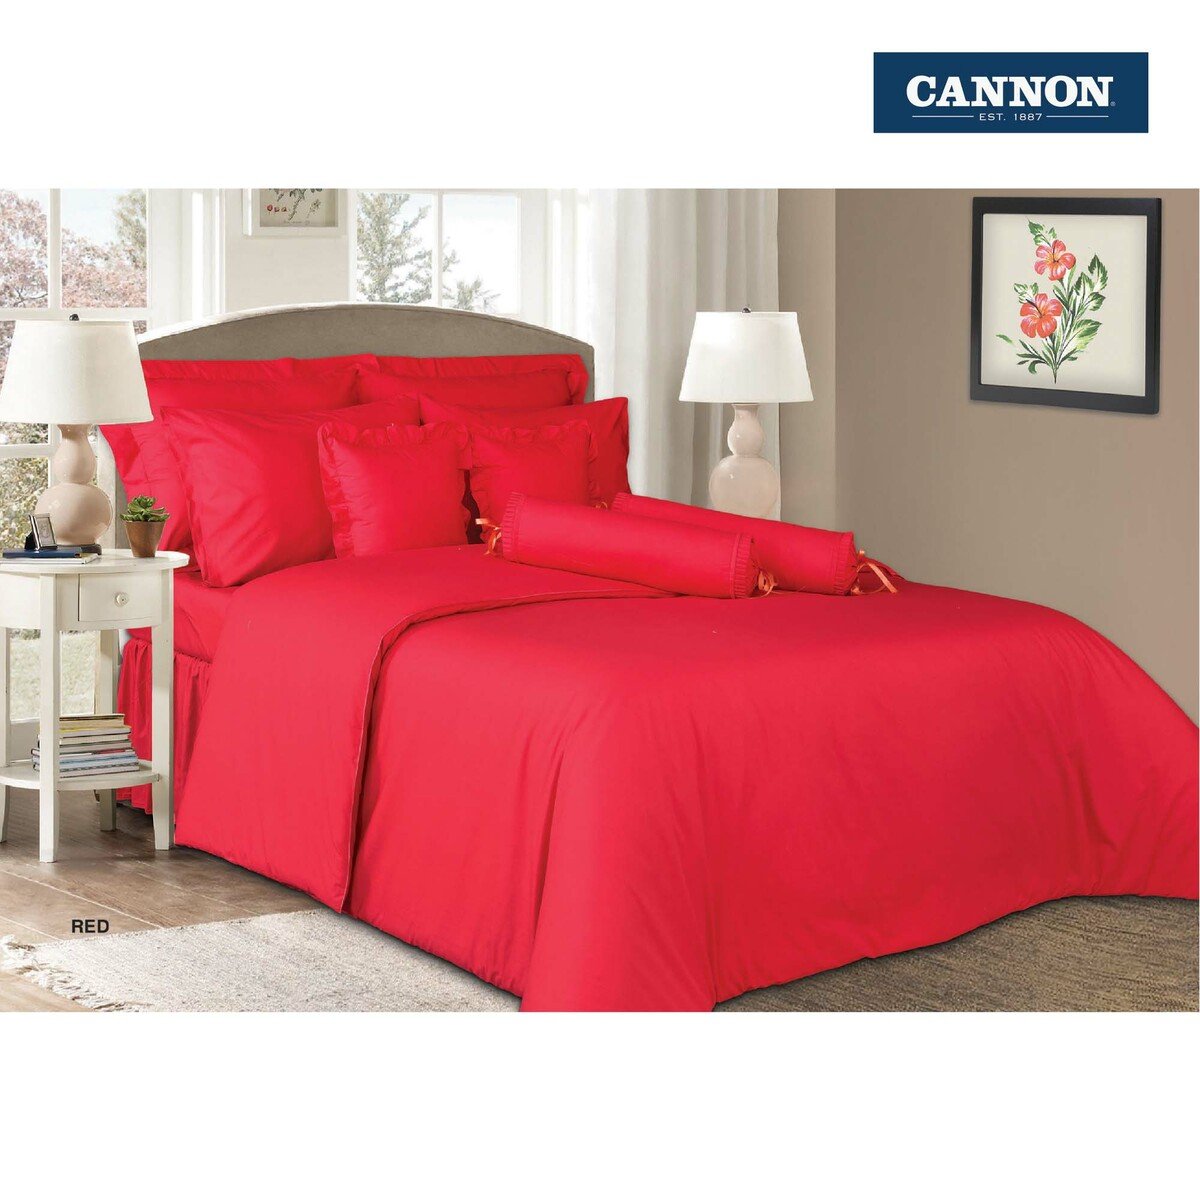 Cannon Bed Sheet + 2pcs Pillow Cover Plain King Size 274x259cm Red